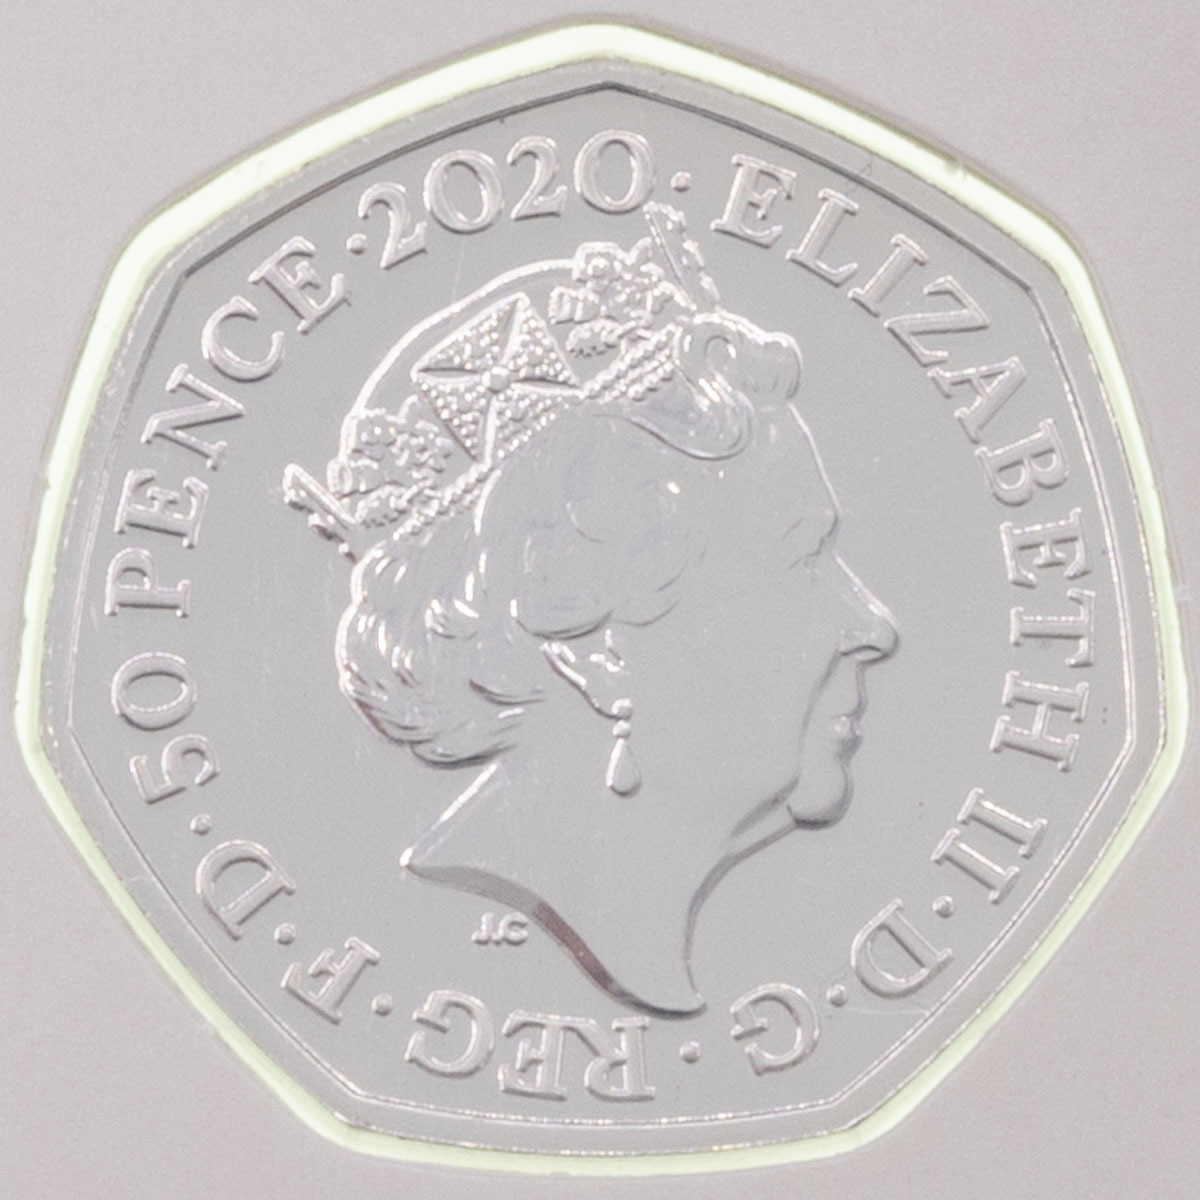 UK20PXBU 2020 Diversity Built Britain Fifty Pence Brilliant Uncirculated Coin In Folder Obverse